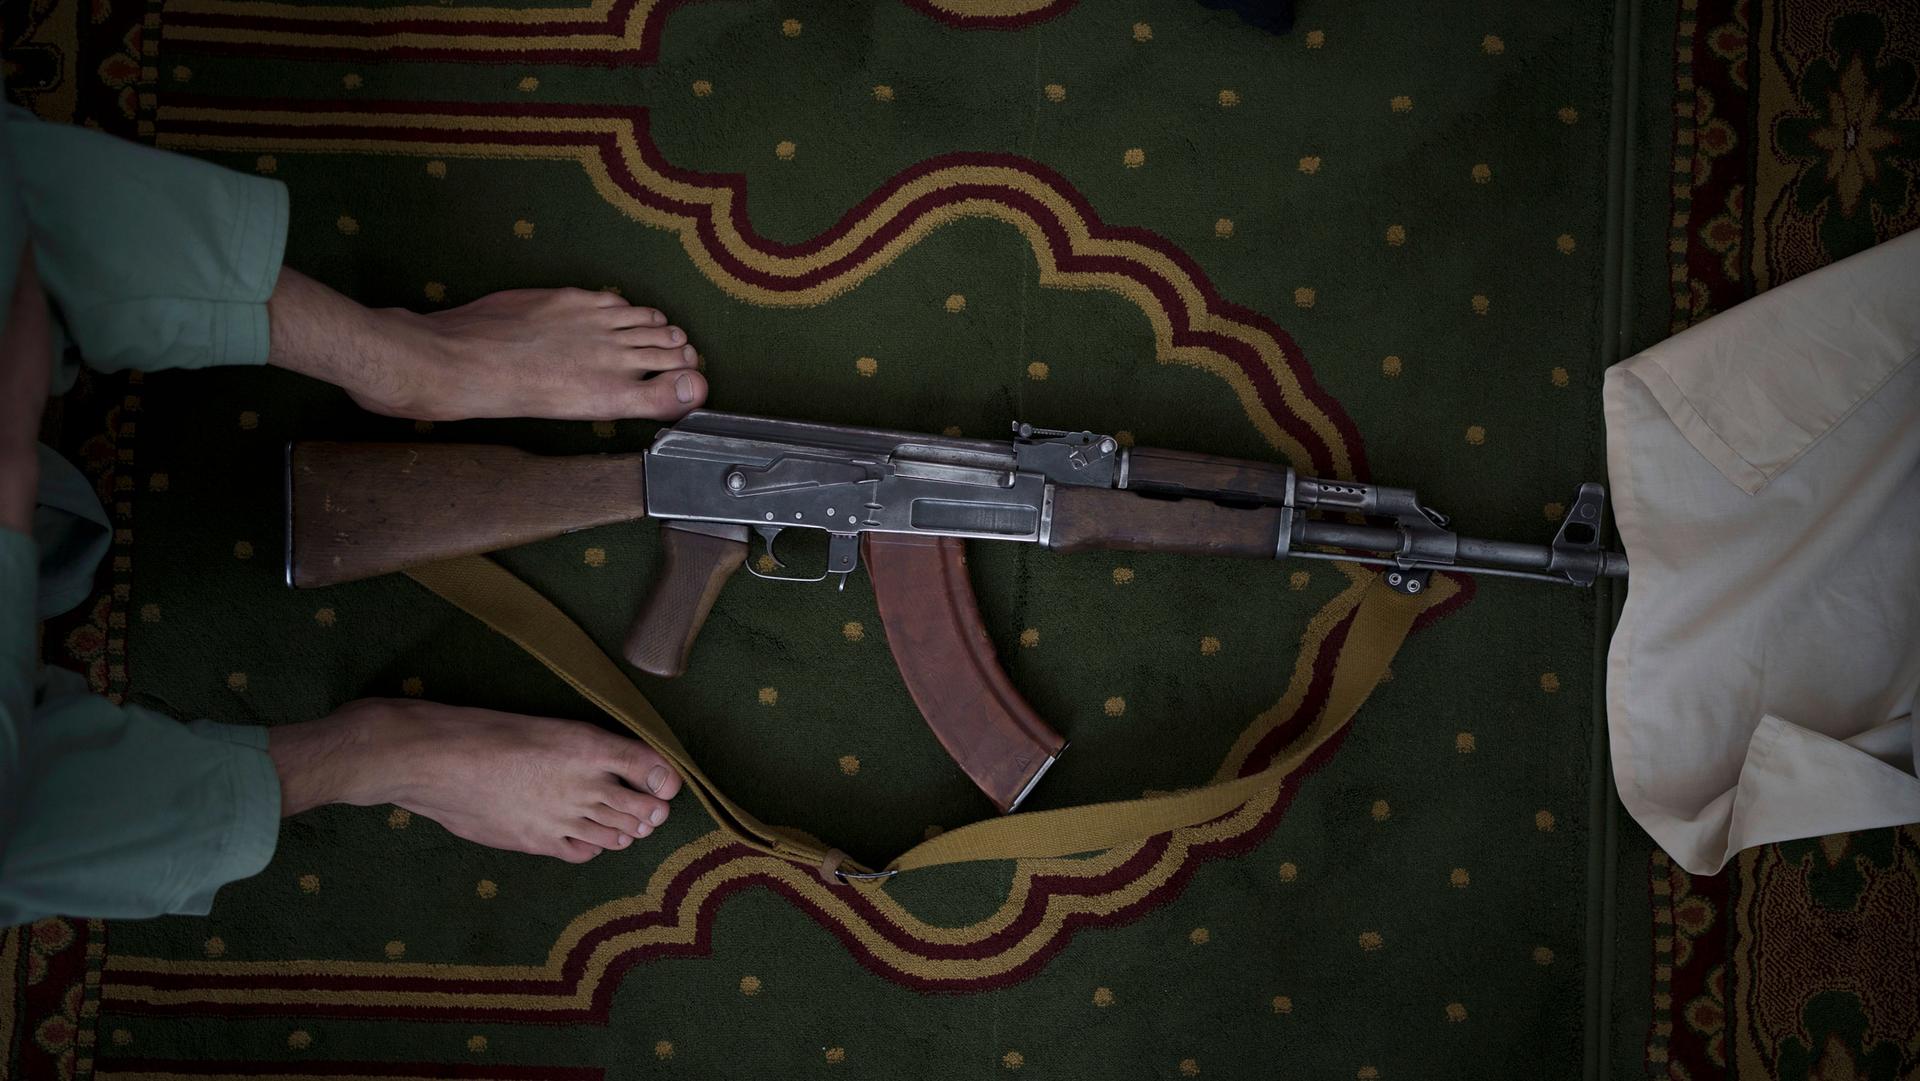 A Taliban fighter lays his AK-47 rifle down during Friday prayers at a mosque in Kabul, Afghanistan, Friday, Sept. 10, 2021. 